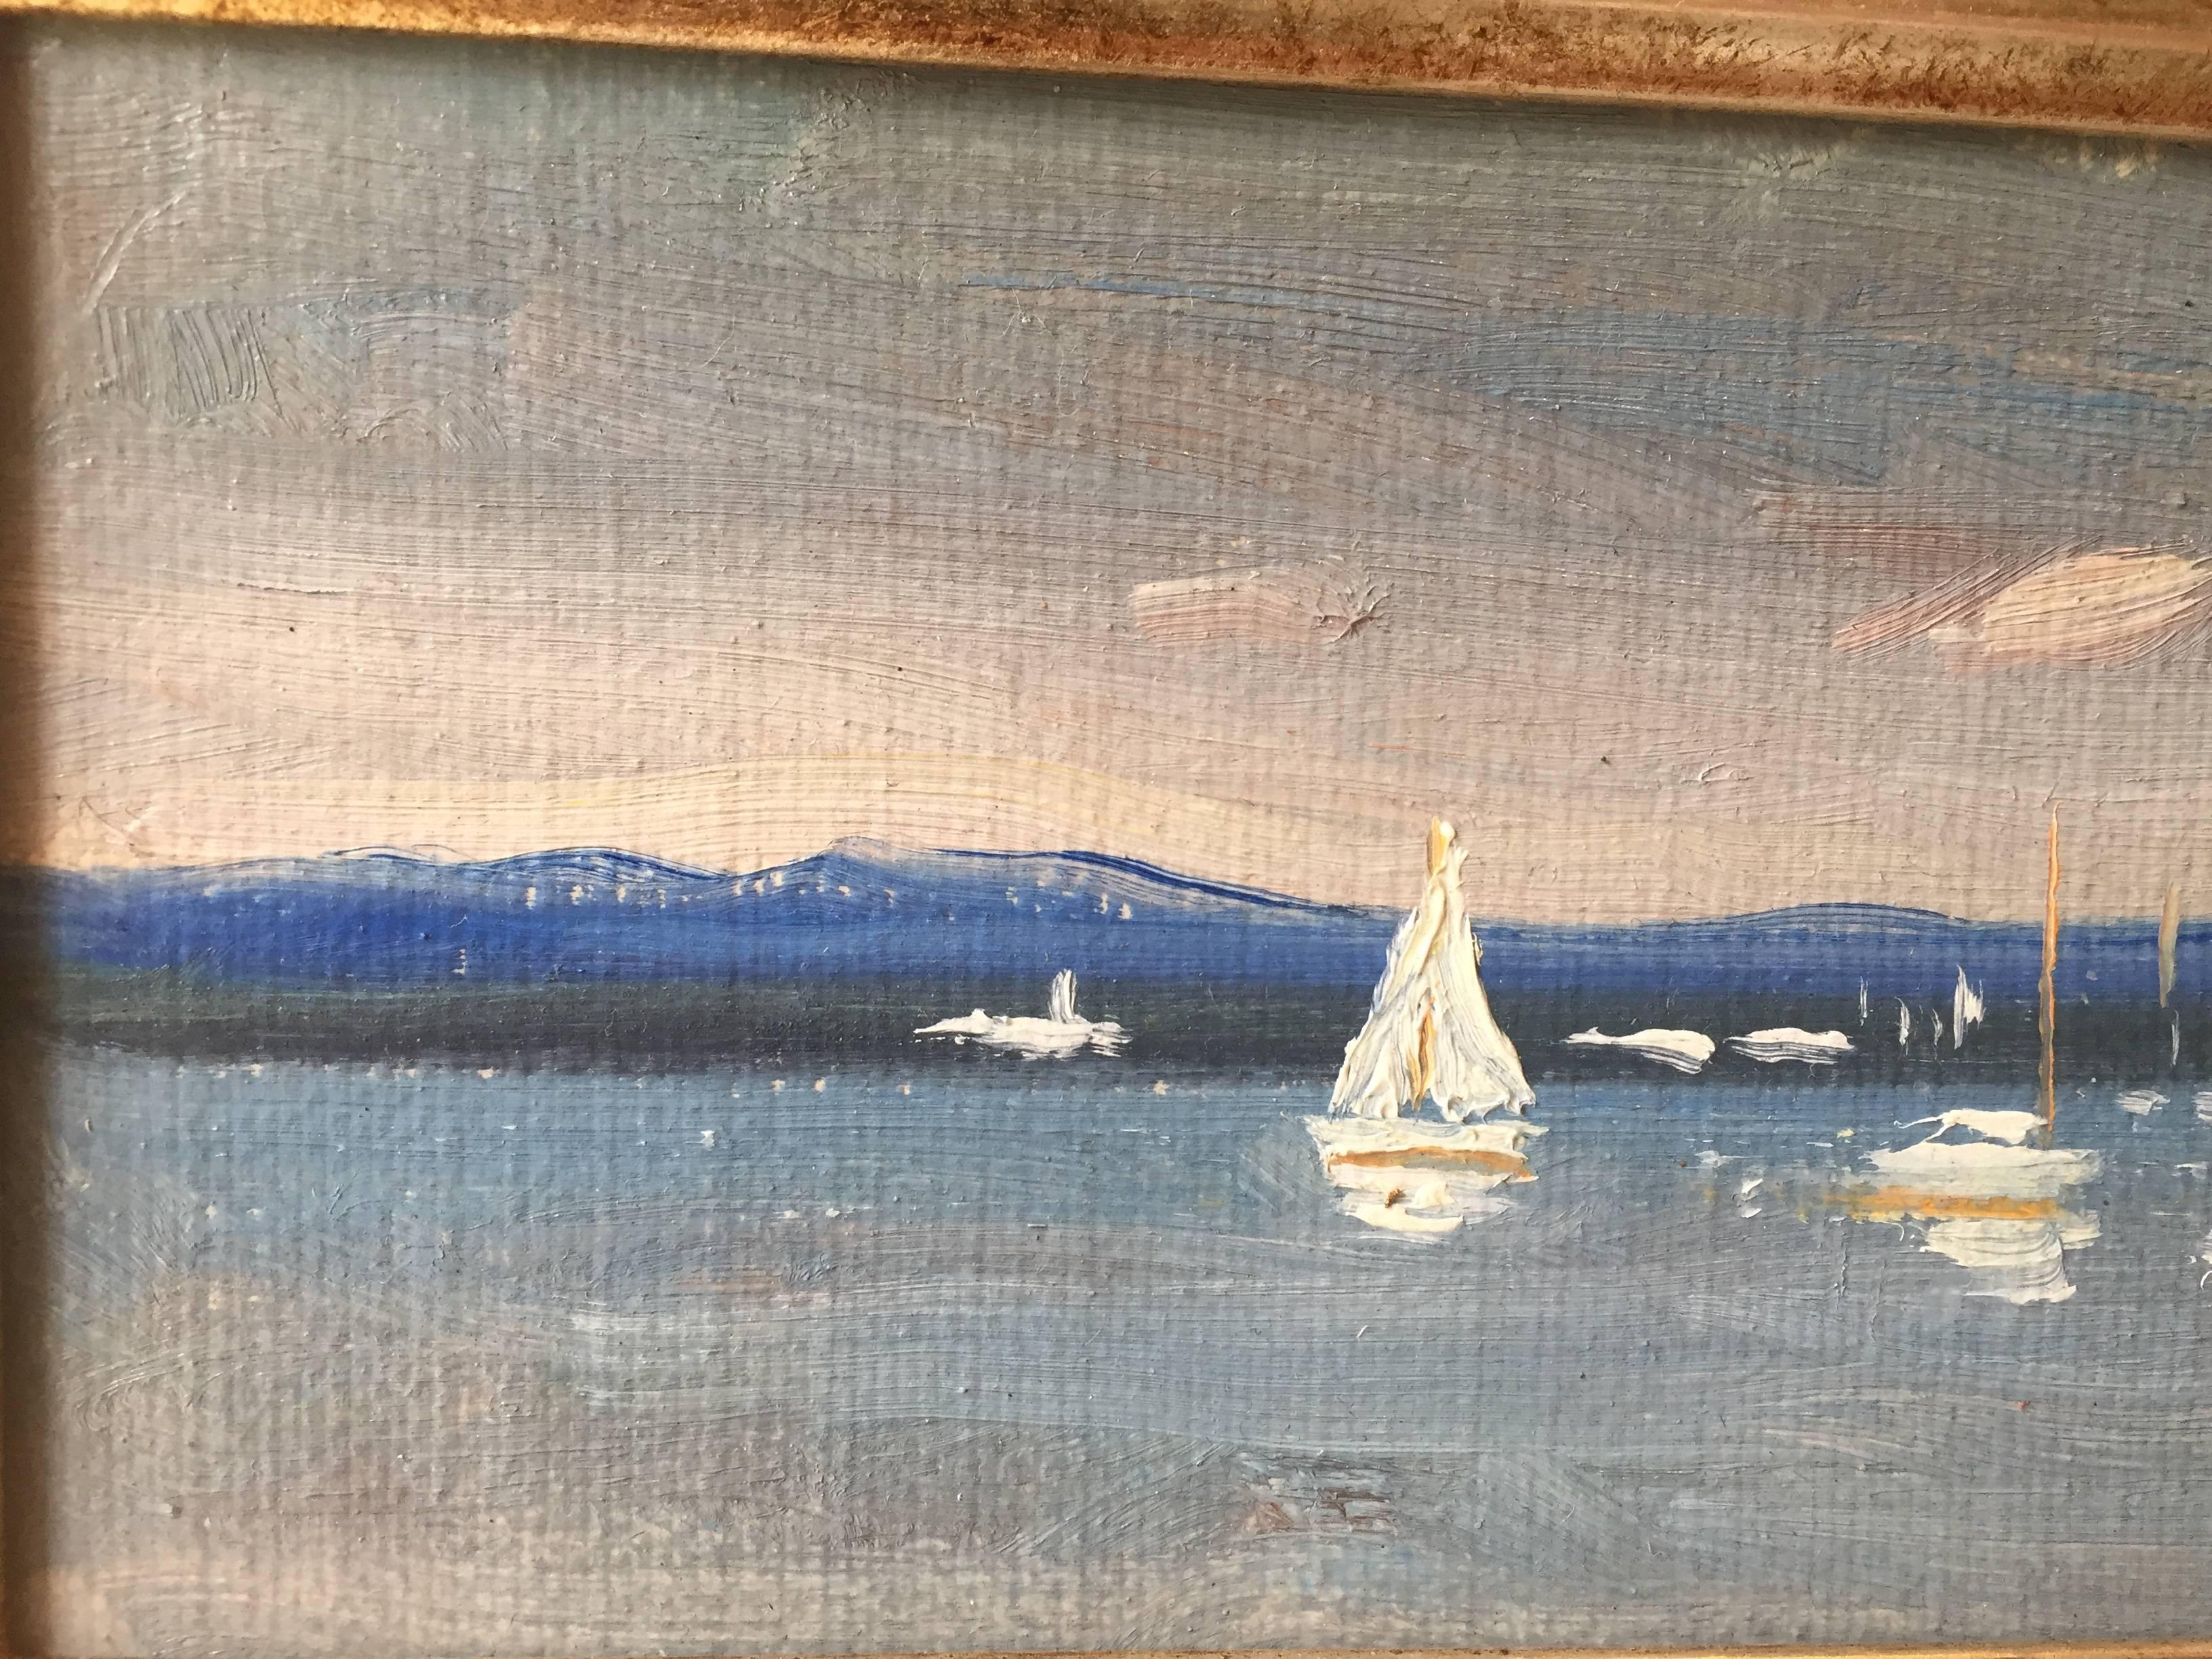 Painted en plein air on the East End of Long Island, around the village of Sag Harbor. We see many sailboats at rest and a few with sails up. The horizon is a dark thick line of what is most likely distant trees on the shore.


Nelson H. White was